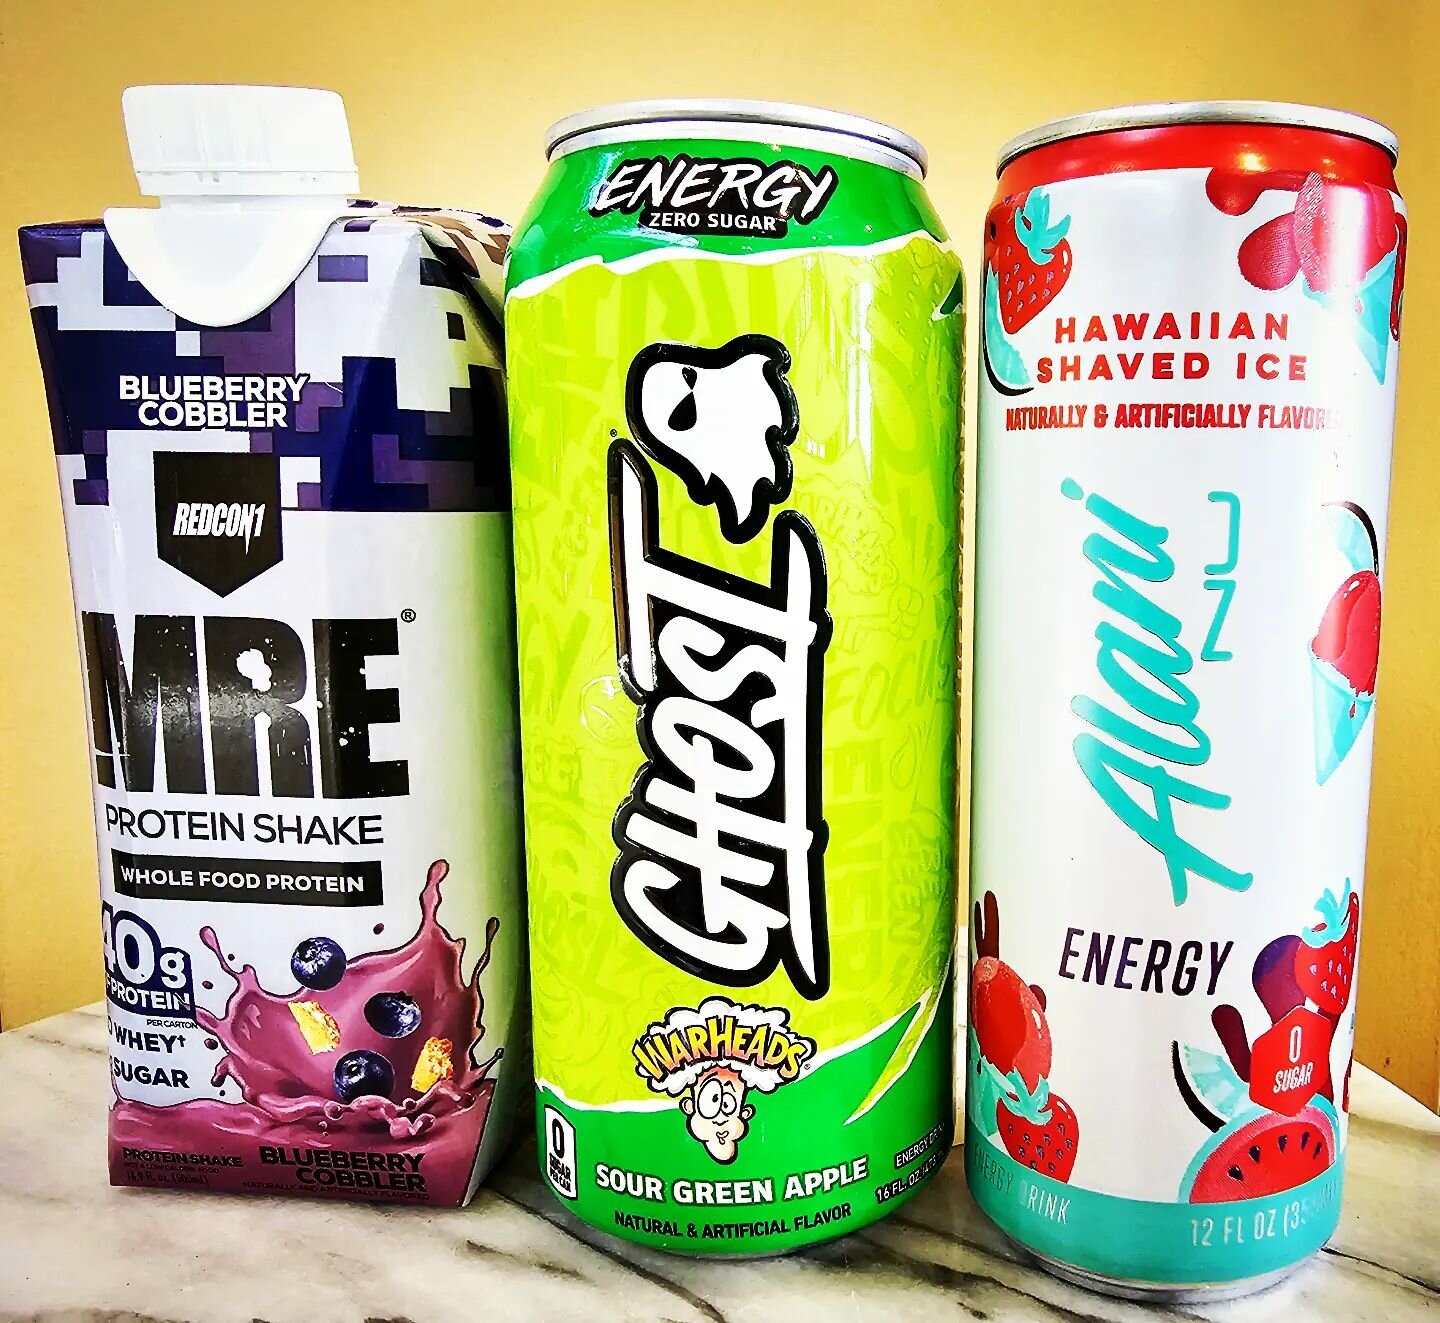 New week, new products!! Introducing three new &amp; awesome #drinks to the #cafe:
@redcon1 Blueberry Cobbler MRE protein shake - 40g #protein, 0g sugar, zero whey
@alaninutrition Hawaiian Shaved Ice energy drink - 200mg #caffeine, 10 calories, plus 